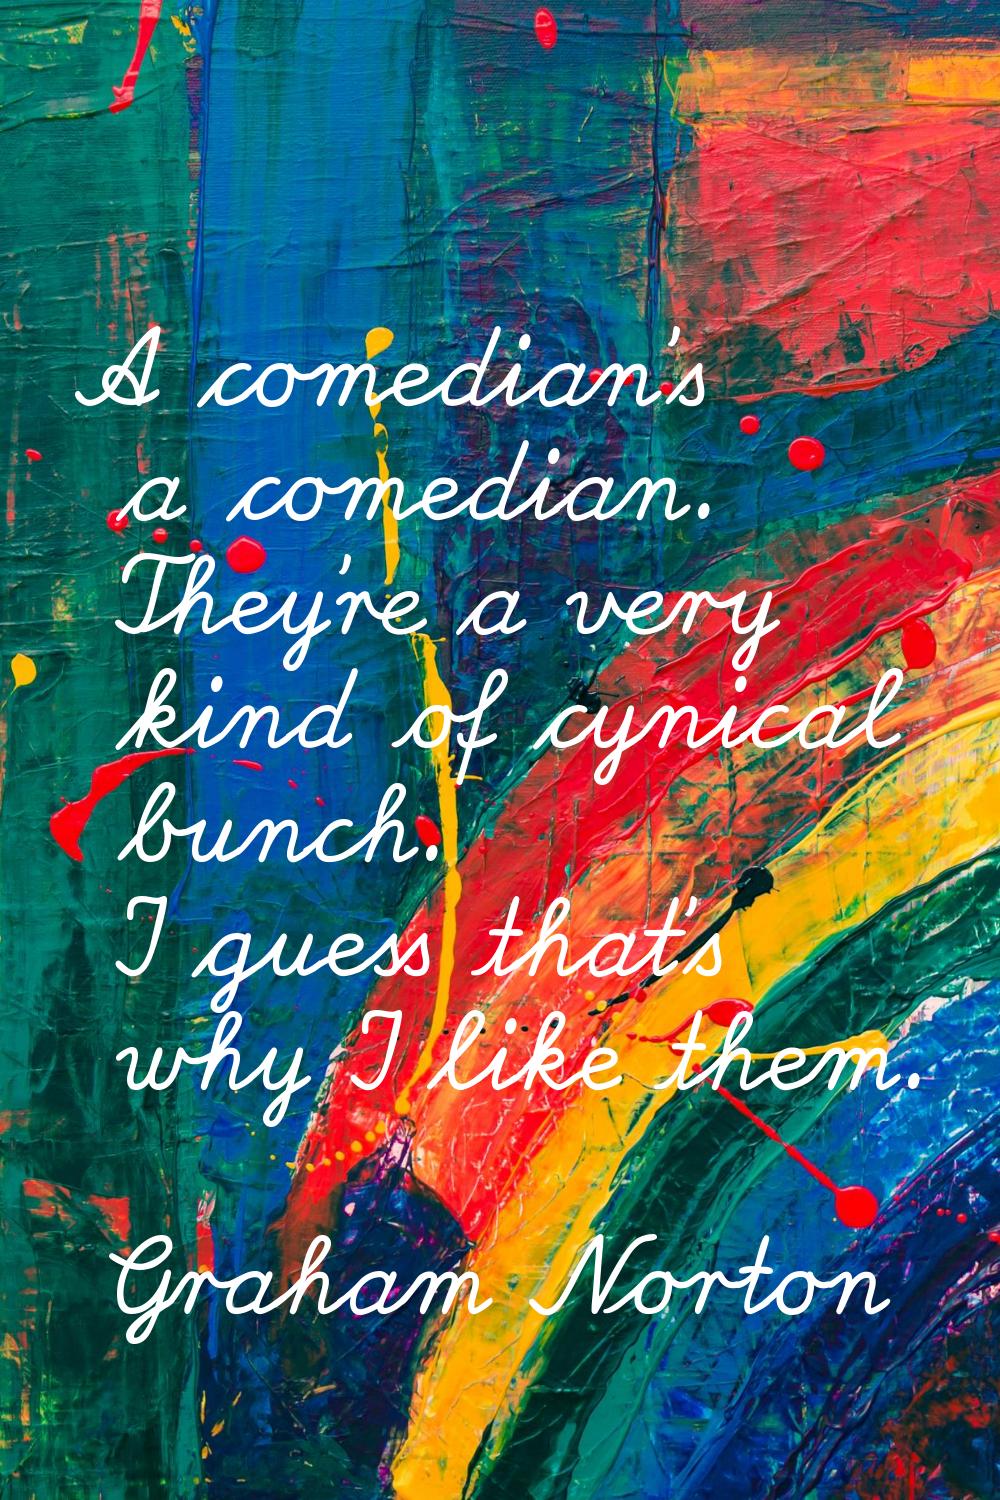 A comedian's a comedian. They're a very kind of cynical bunch. I guess that's why I like them.